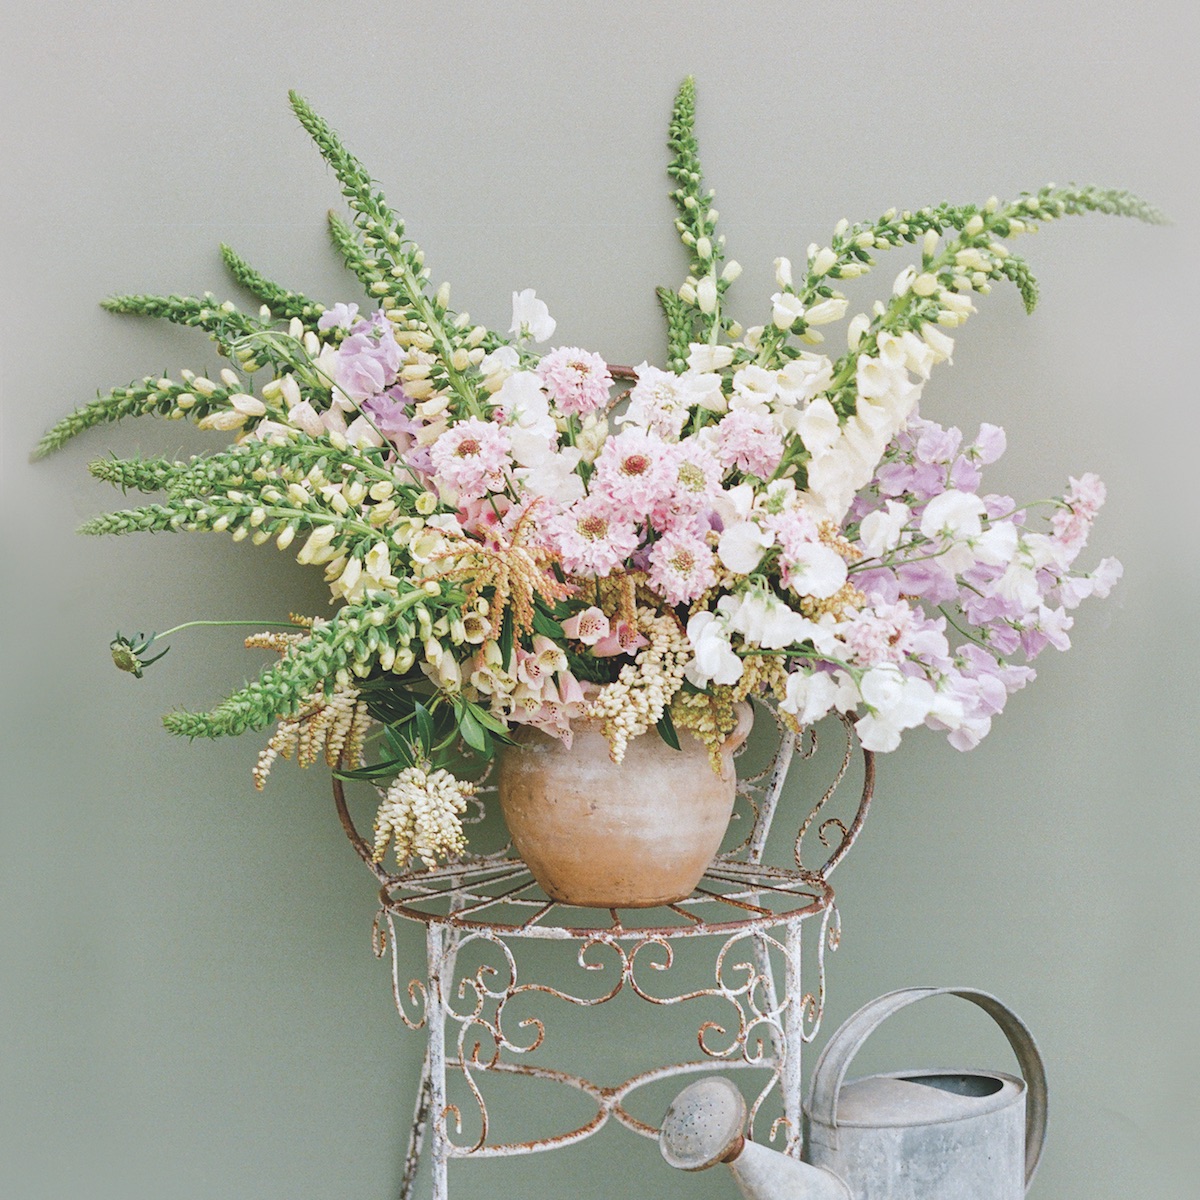 Tuscan jar with pink and white blossoms (sprays of foxglove, scabiosas, Japanese sweet peas, and Pieris japonica)